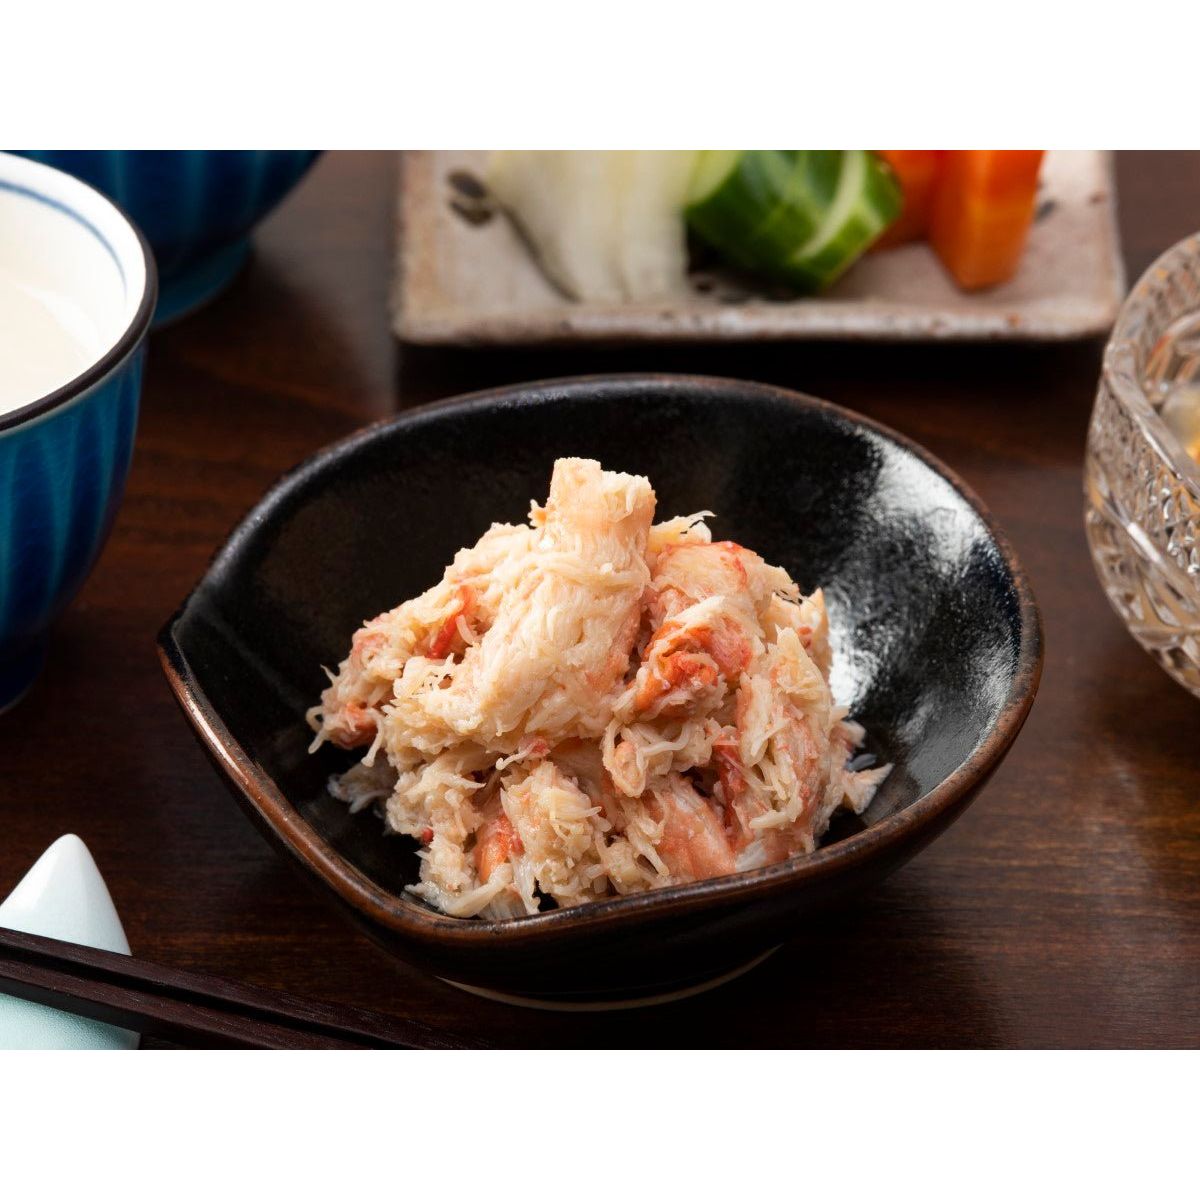 K & K can Tsuma Domestic Red Zwai crab Rois -steamed meat steamed